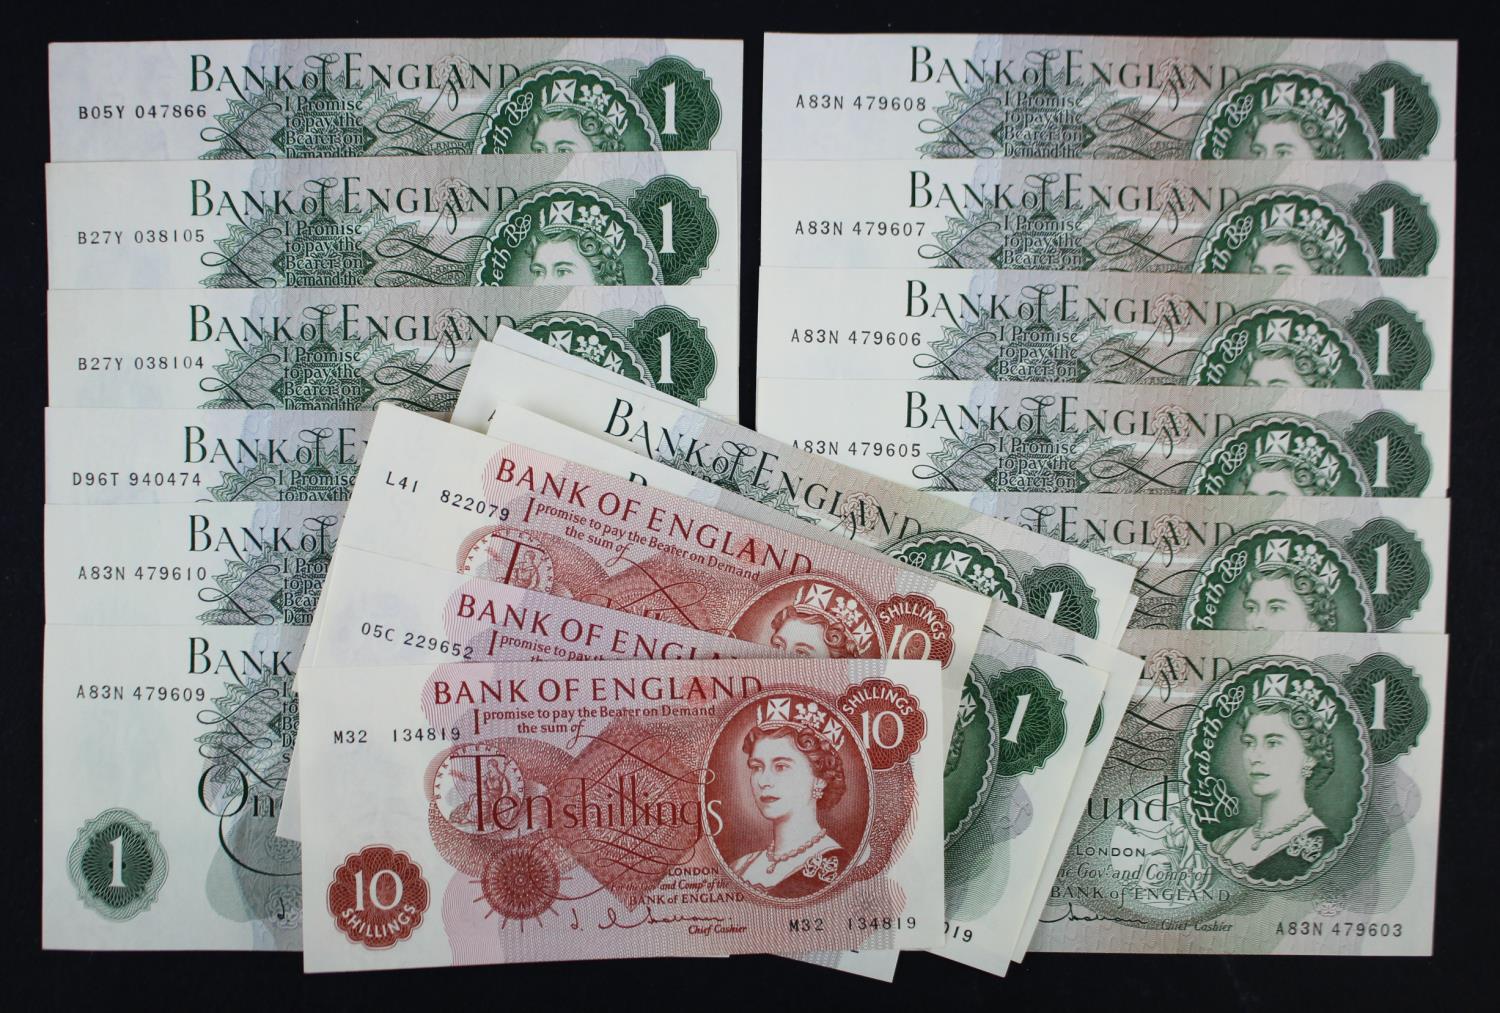 Hollom (19), 1 Pound (16) issued 1963, a consecutively numbered run of 10 FIRST SERIES notes, with